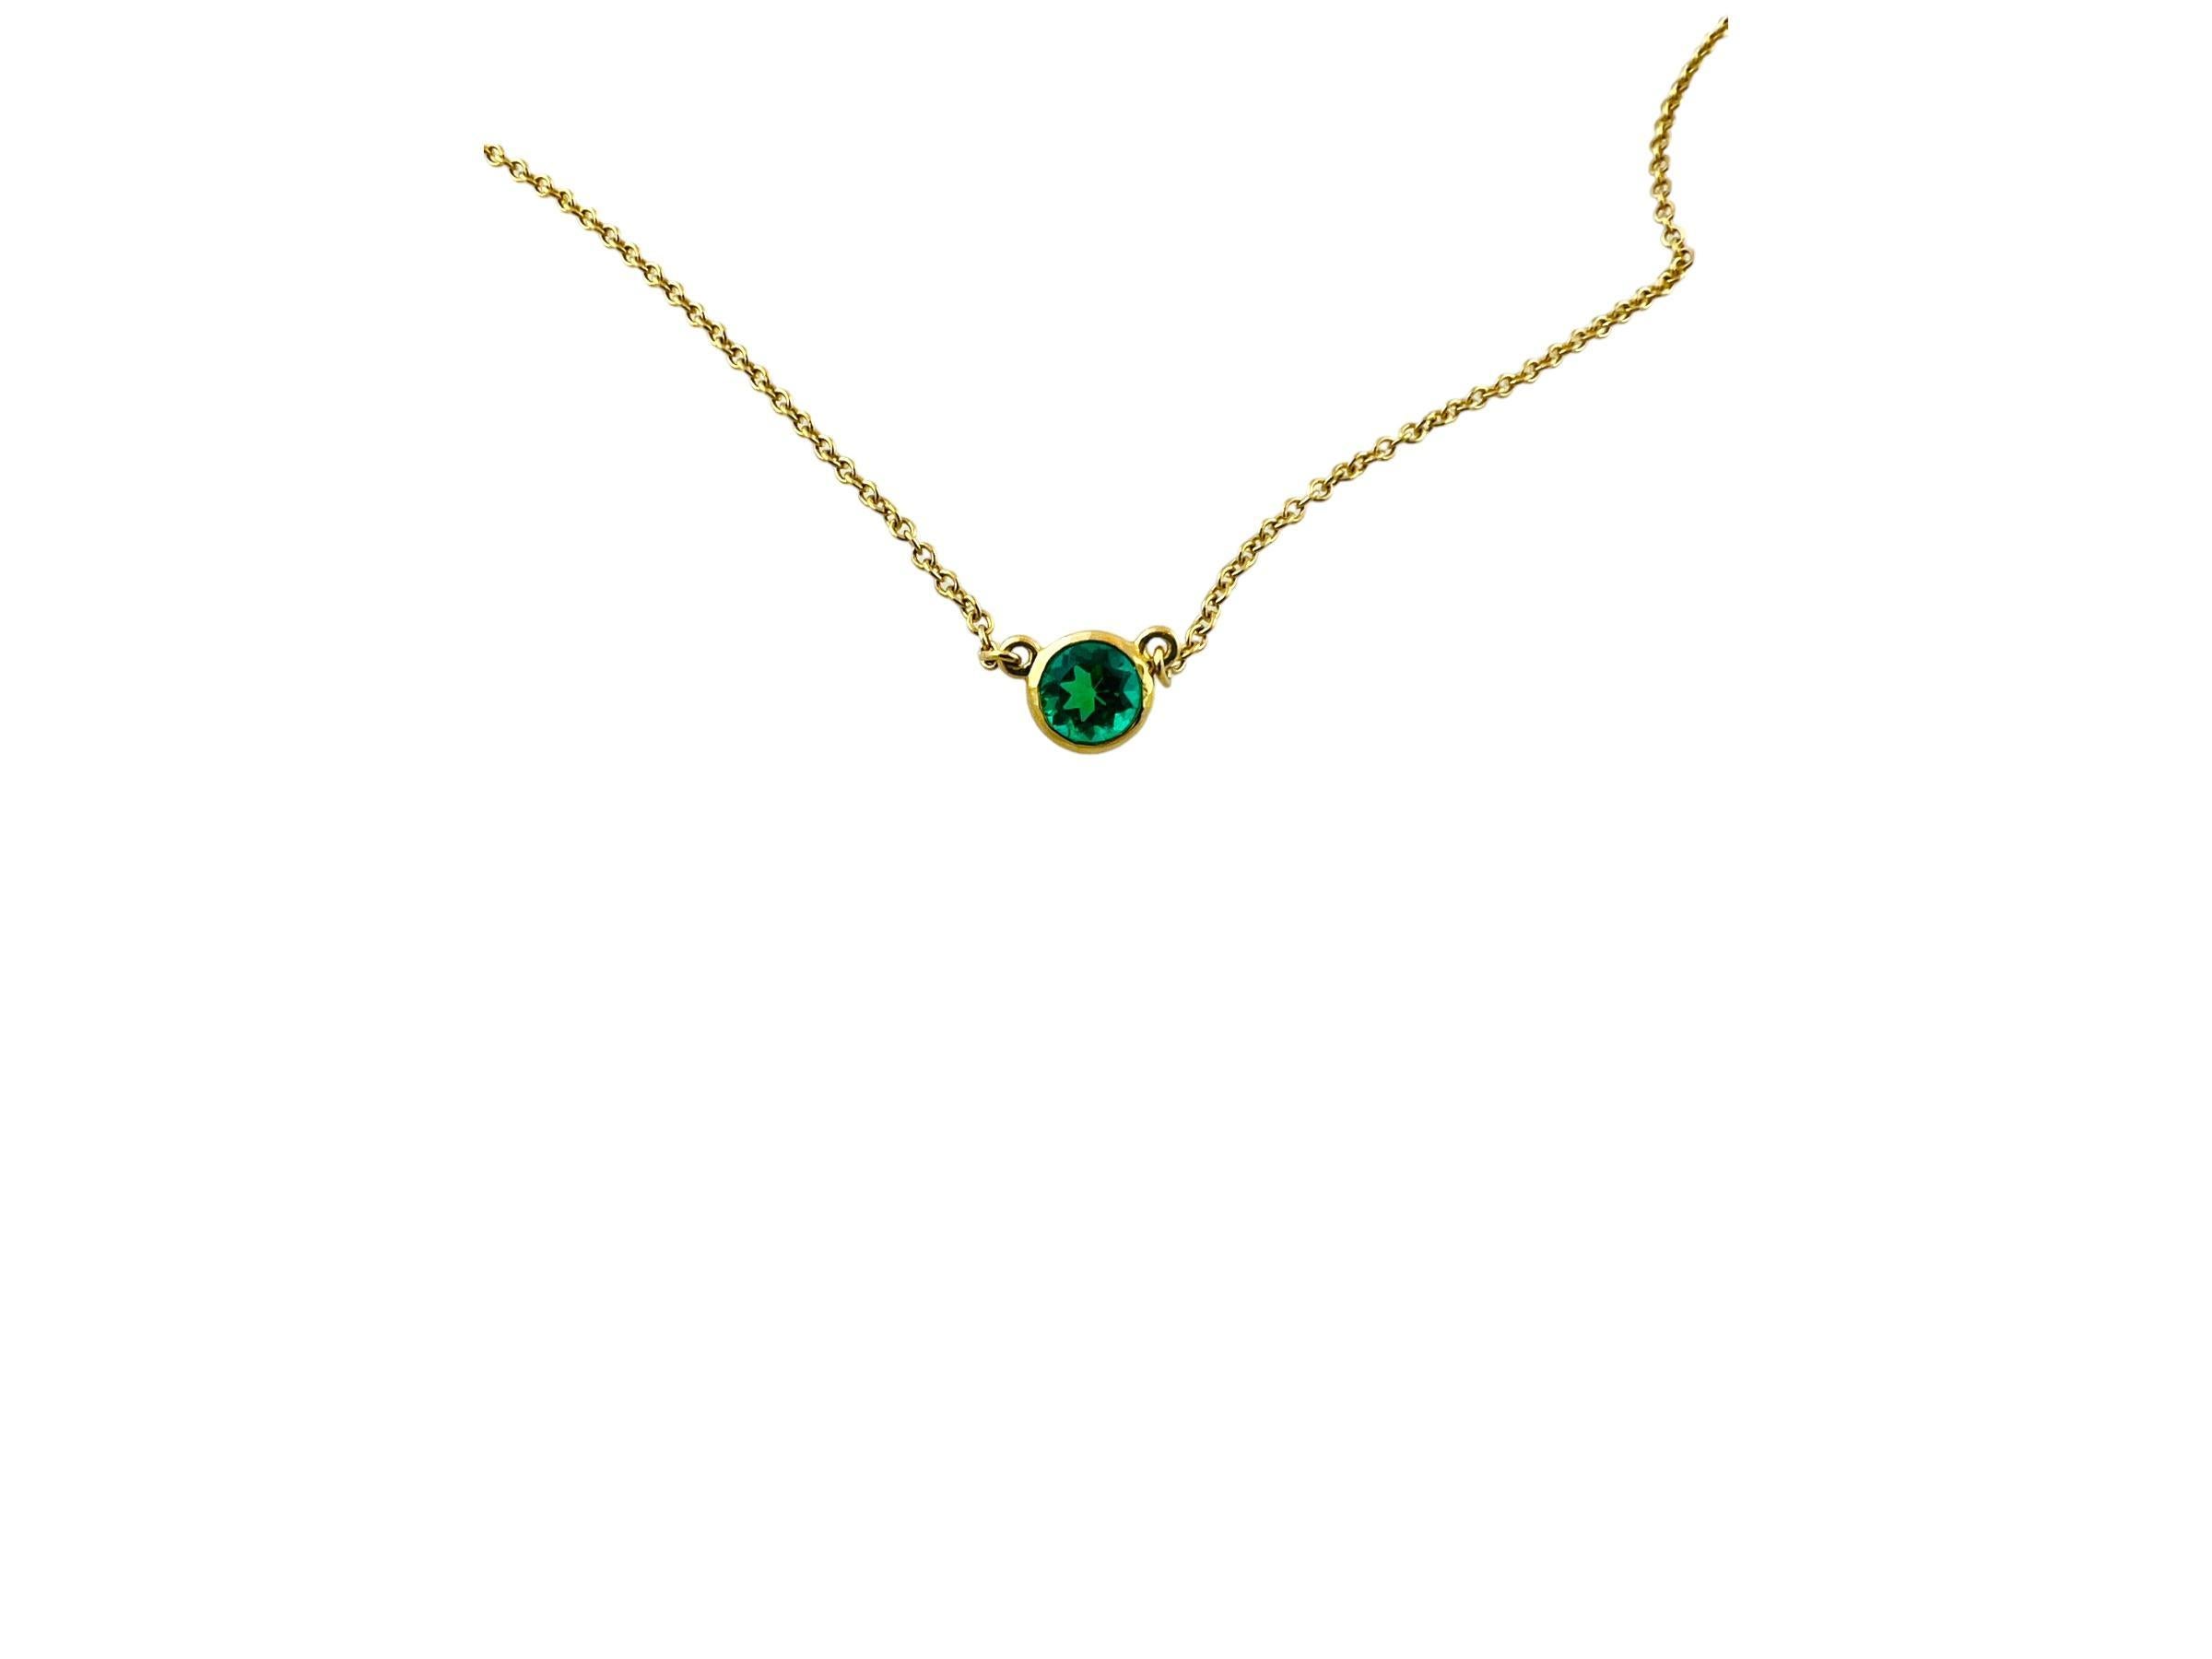 Round Cut Tiffany & Co. Elsa Peretti 18K Yellow Gold Emerald Color by Yard Necklace #16316